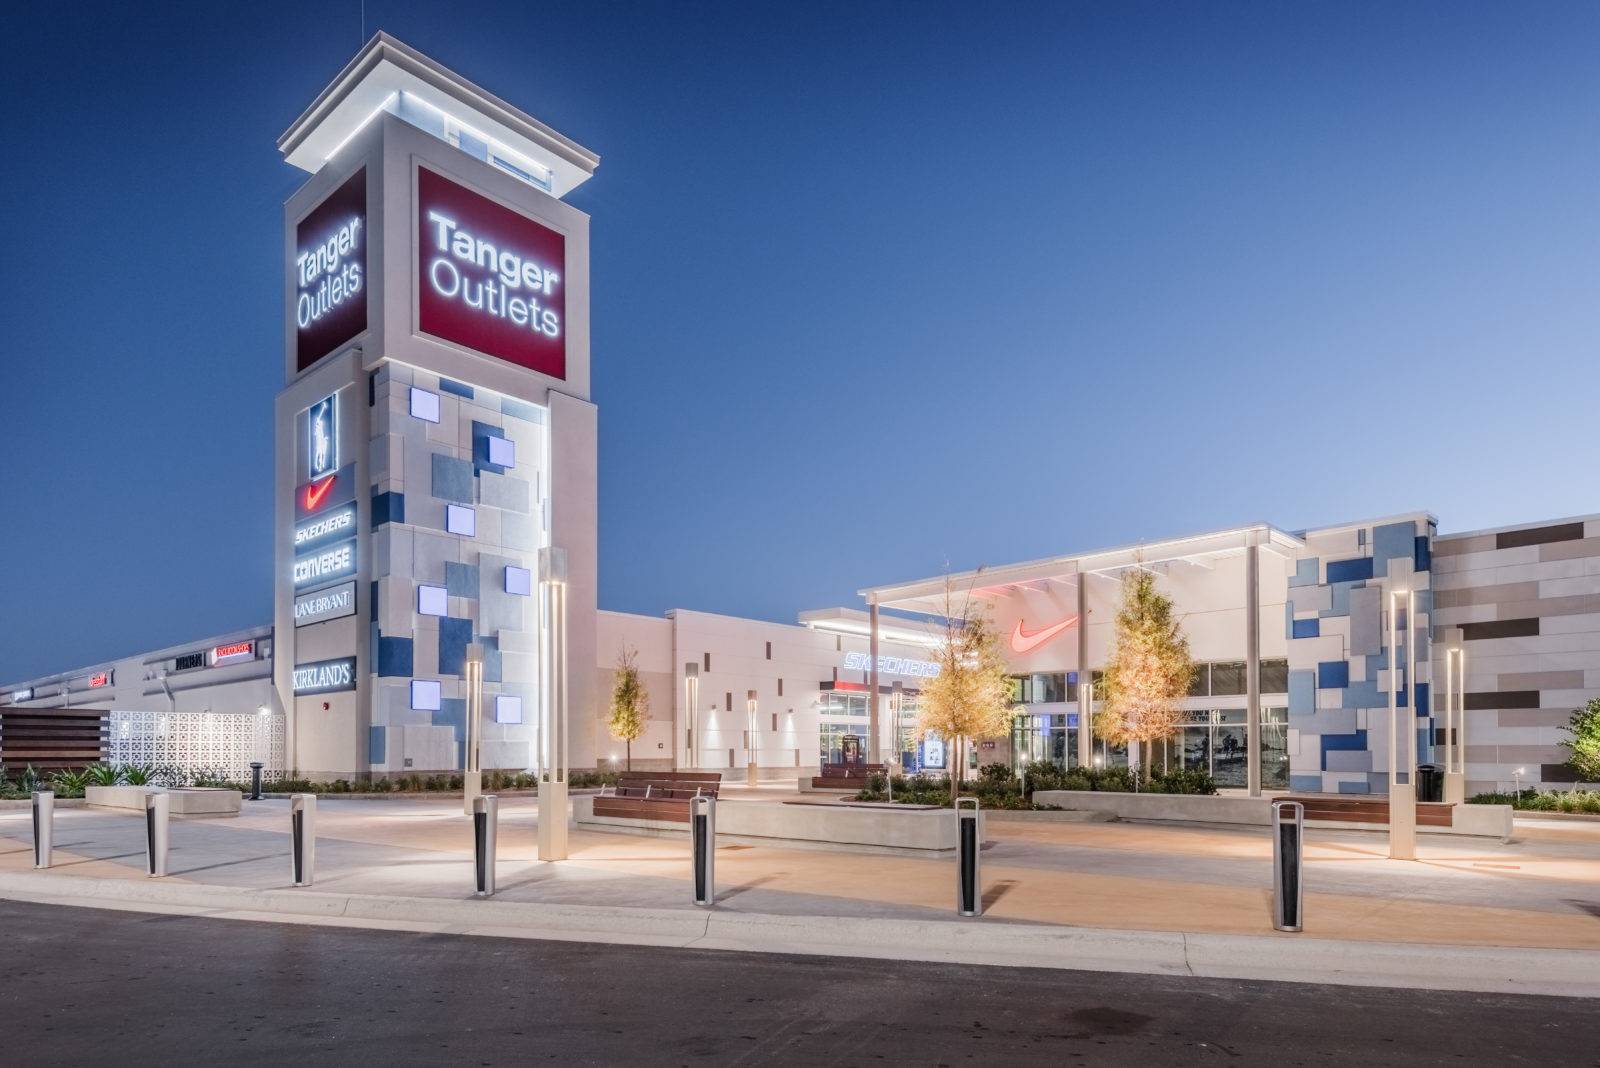 Tanger Outlets Daytona Beach | Projects 